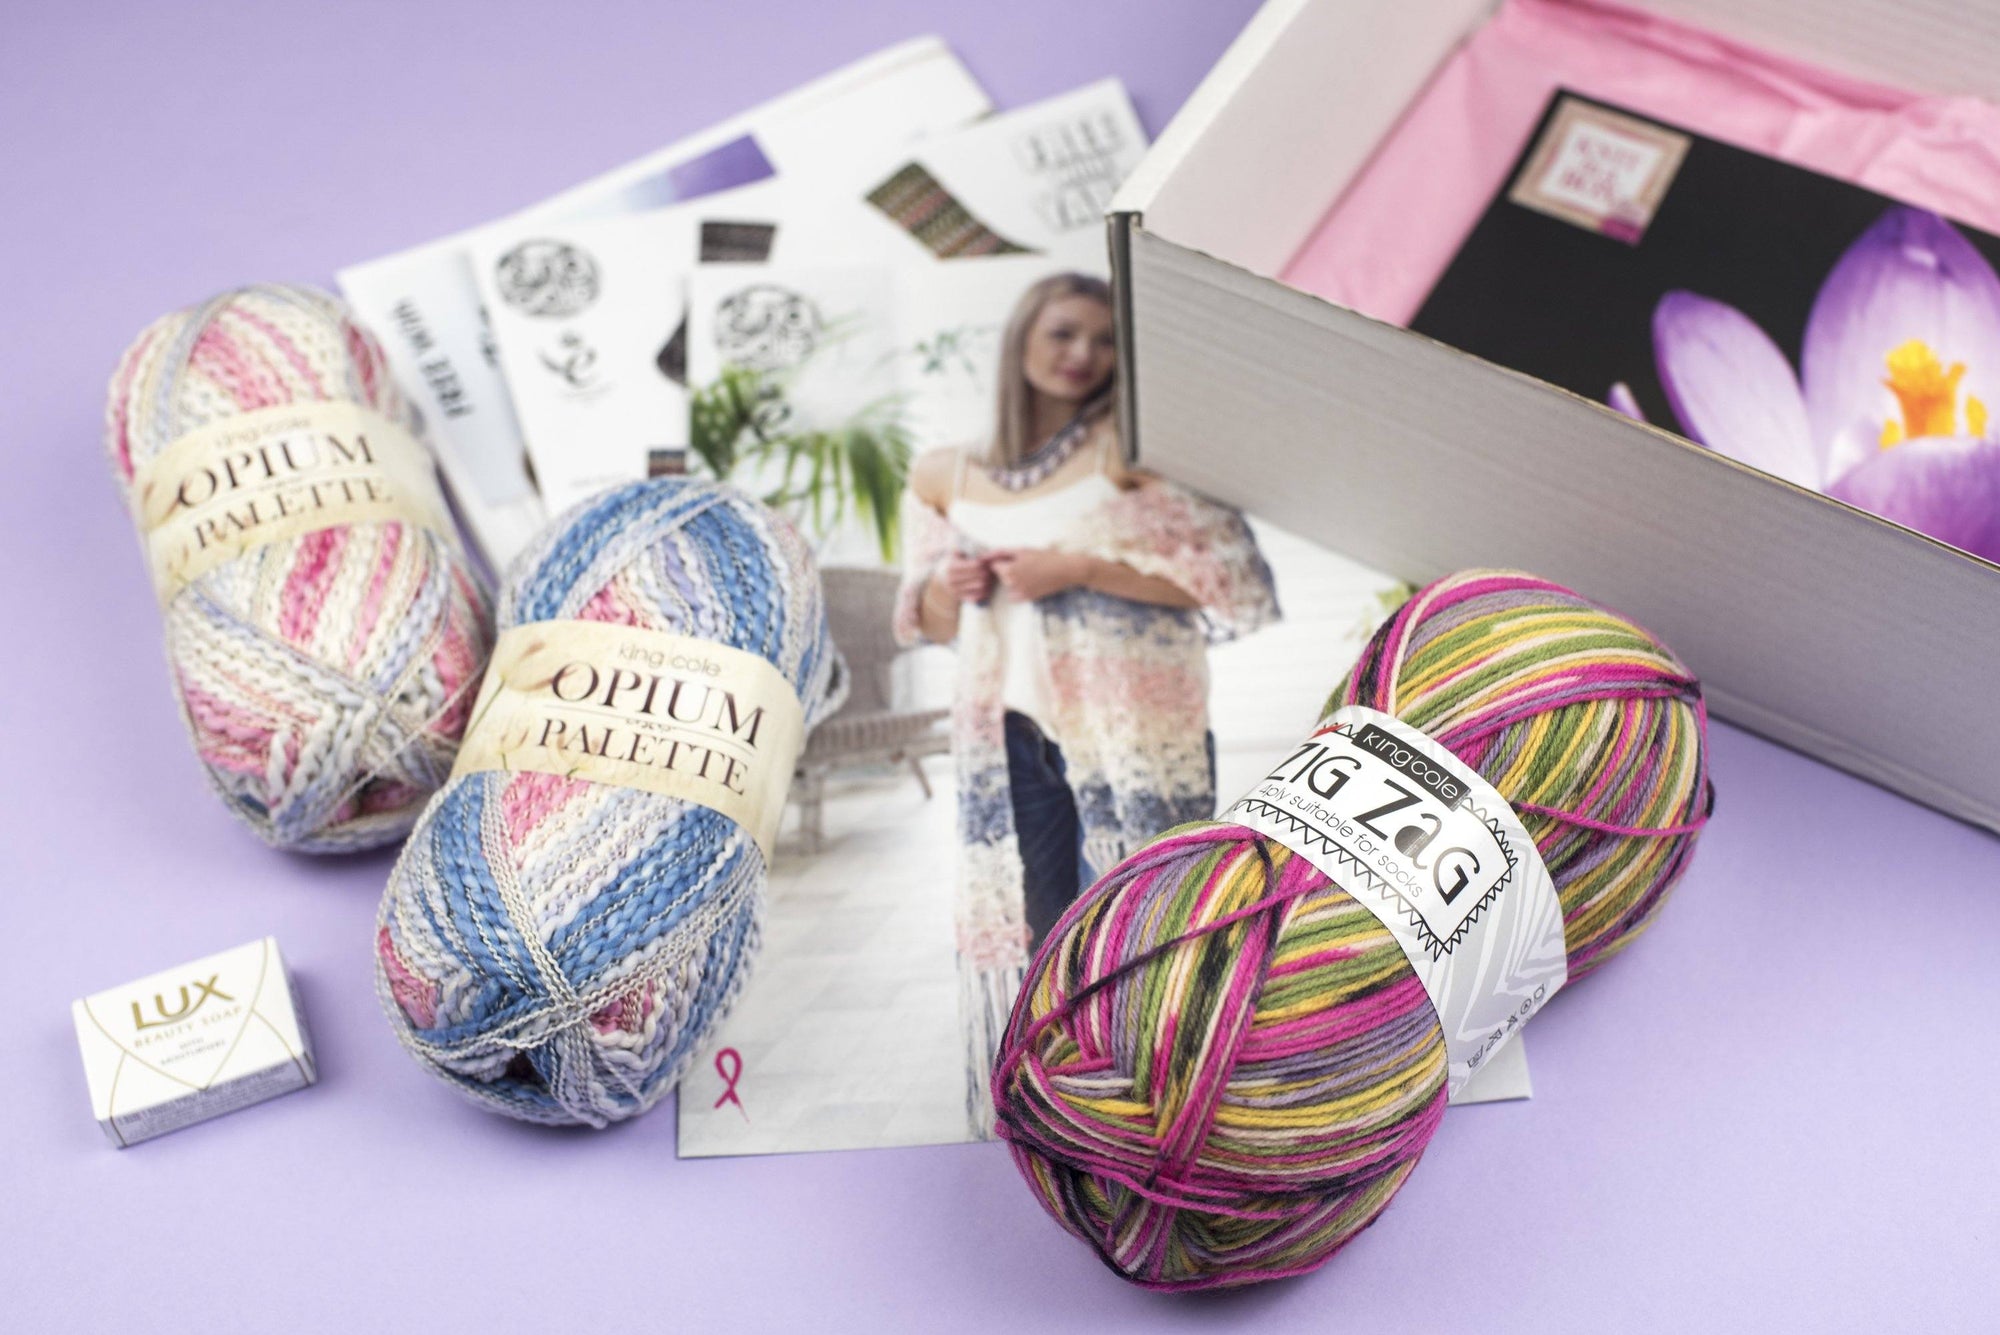 New! Ladies Knitting Subscription Box - Knit in a Box